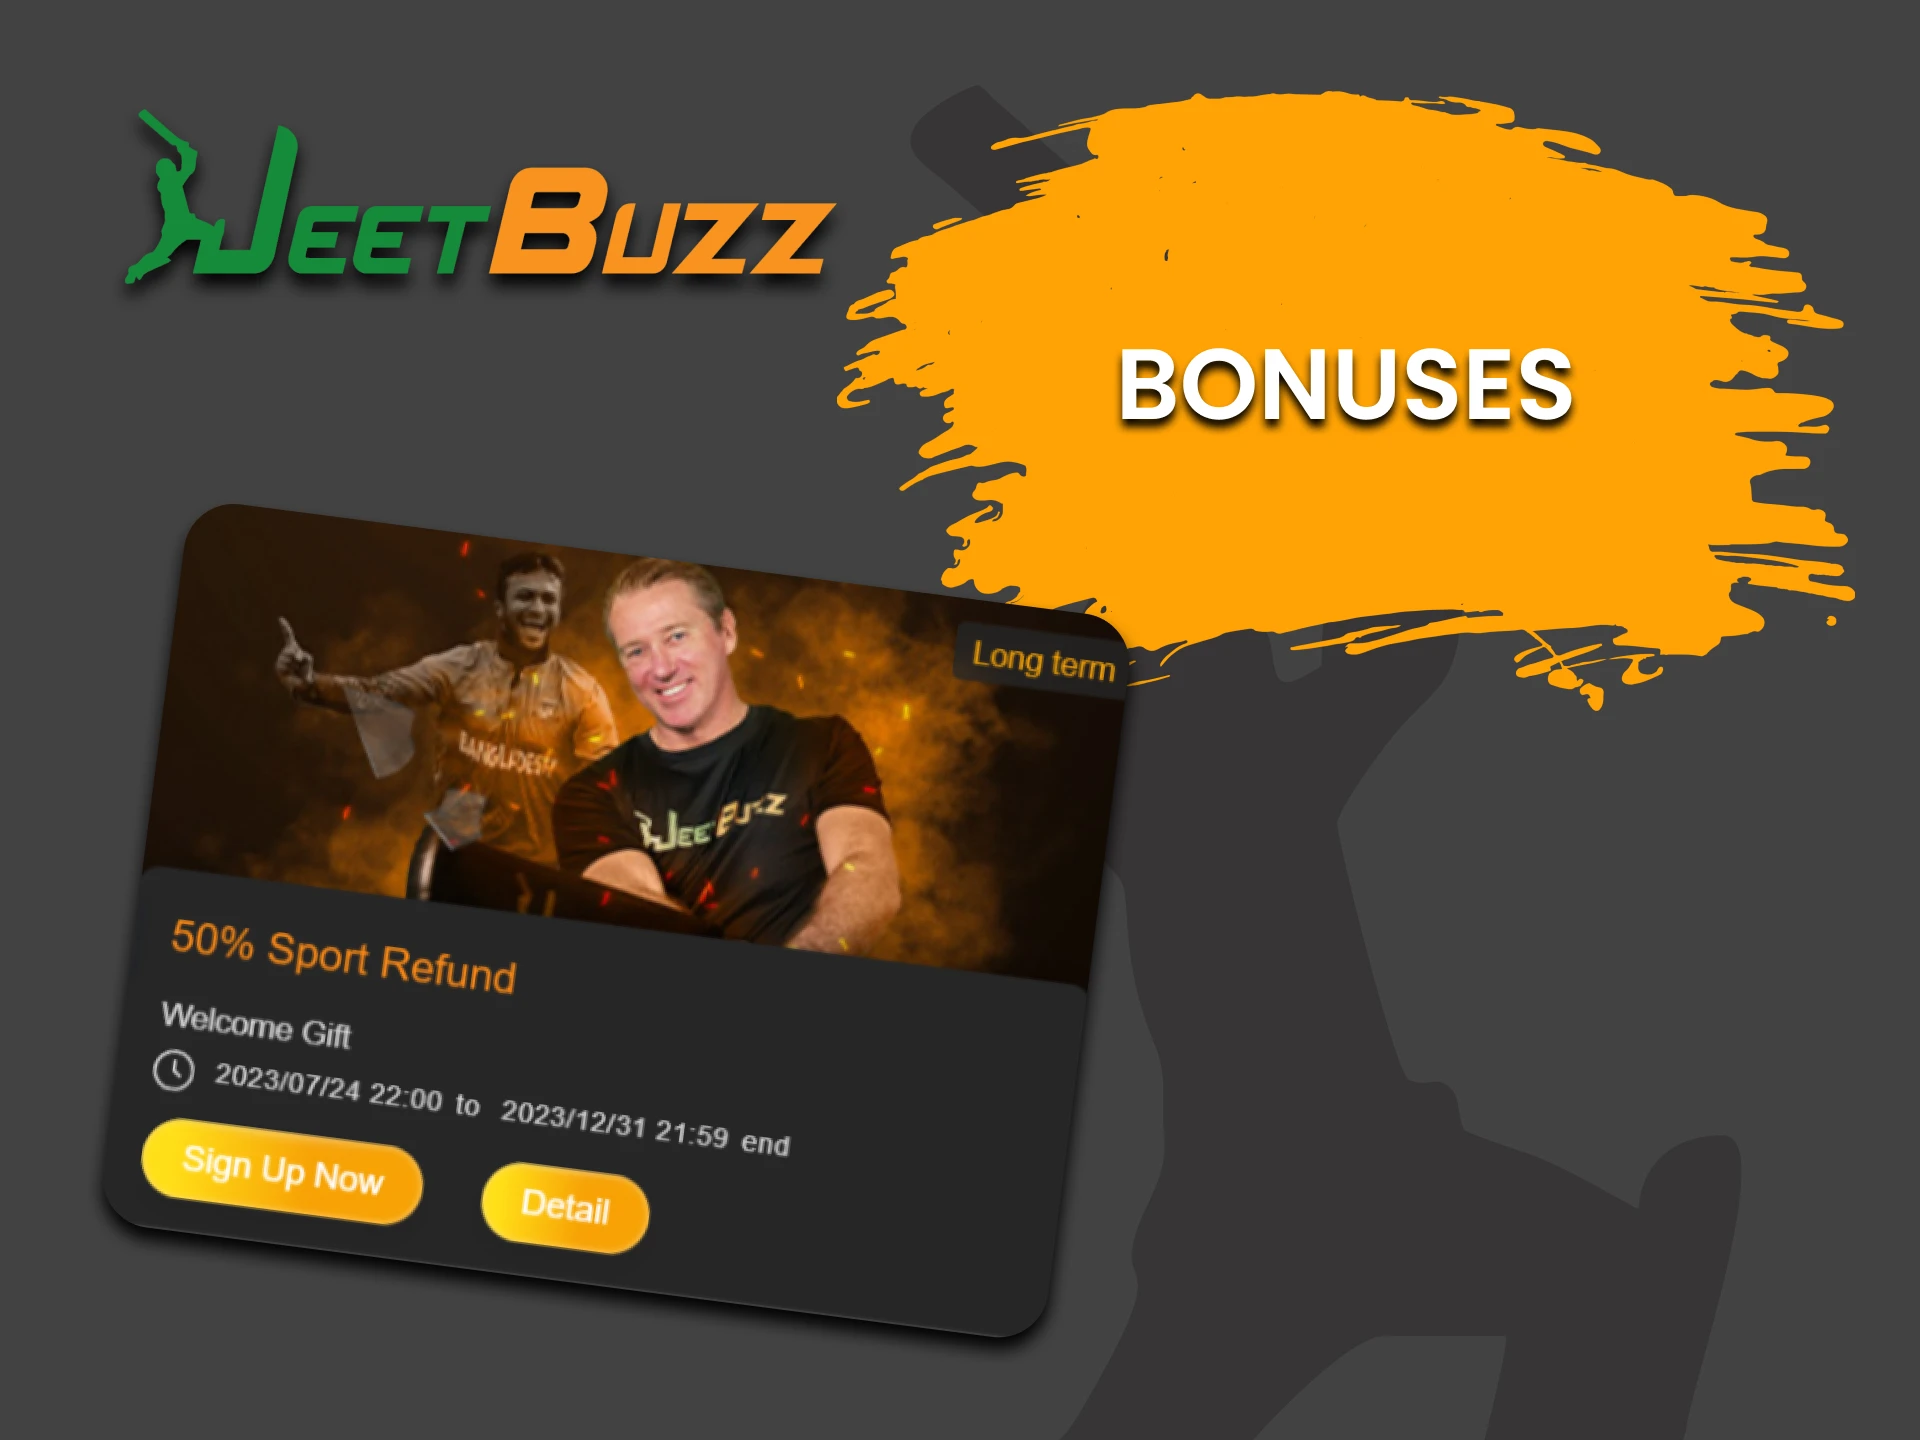 Get a bonus from JeetBuzz for betting on Tennis.